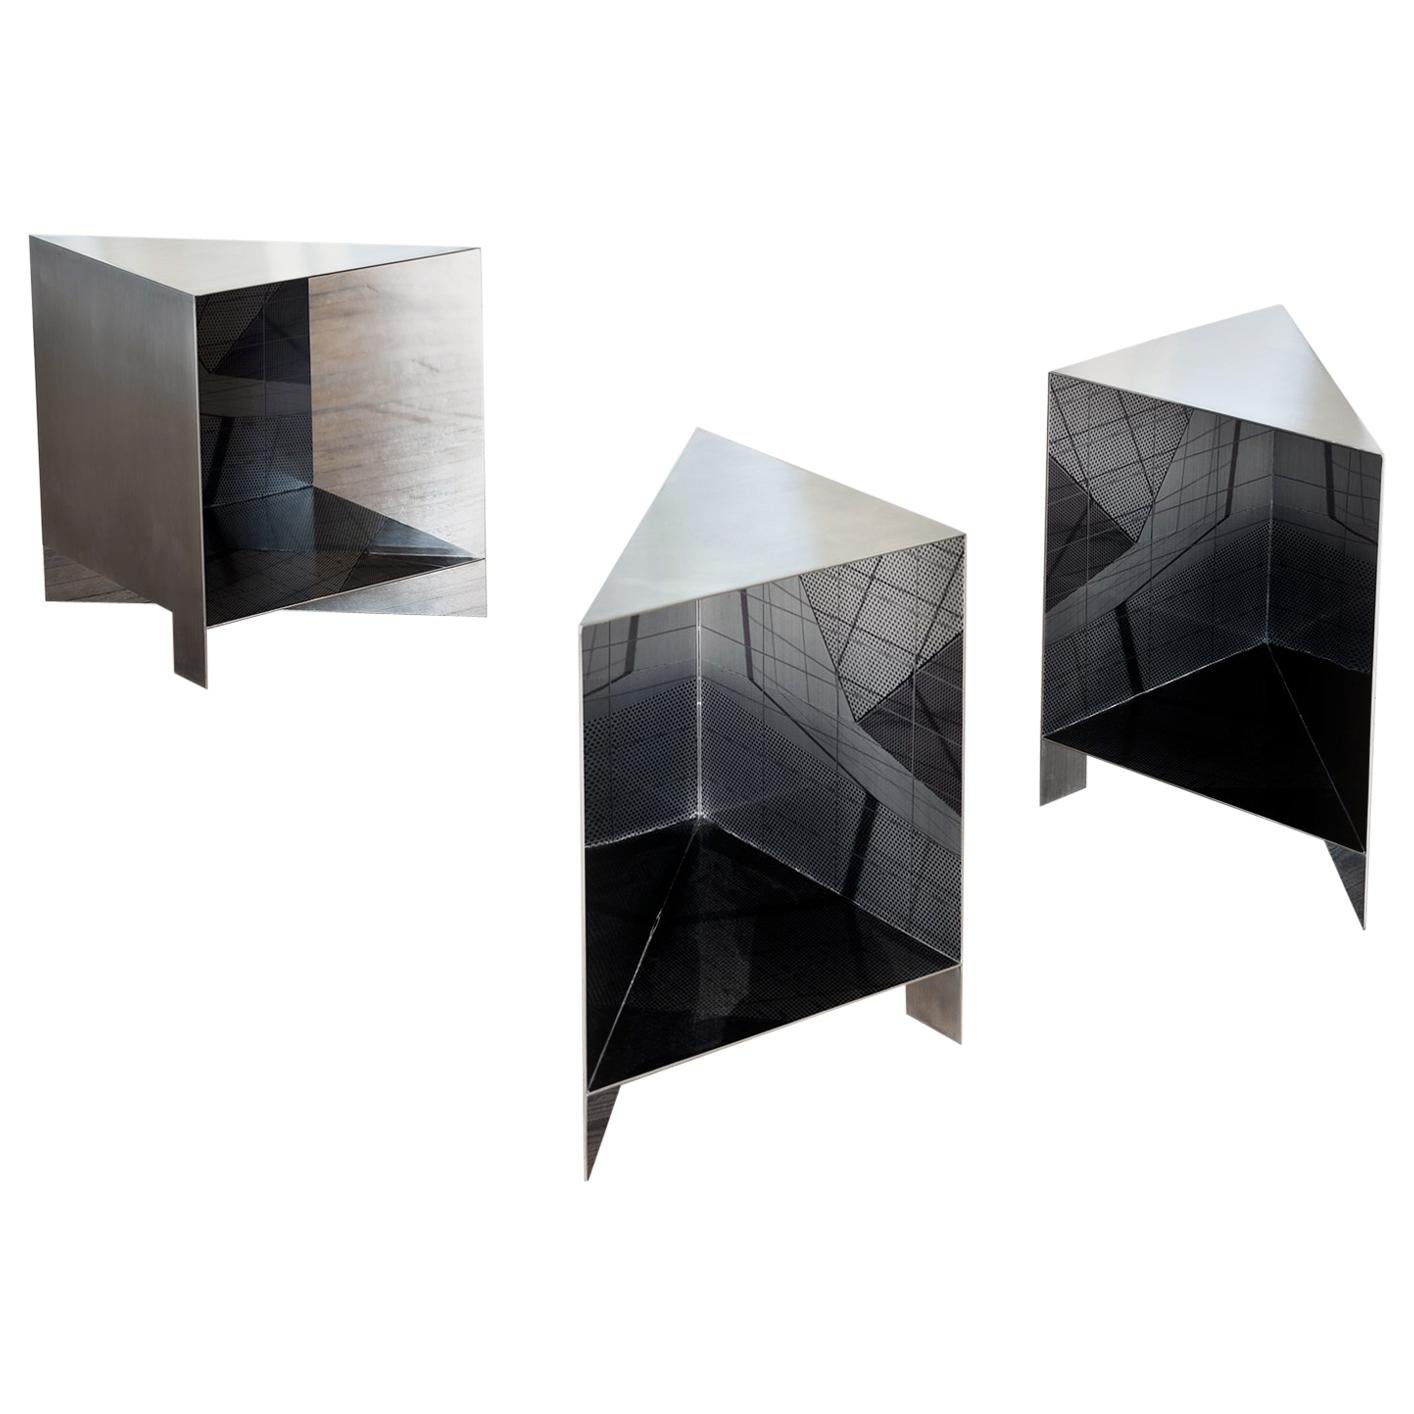 Set of 4 Contemporary Stainless Steal Handcrafted Side Tables by Luis Pons For Sale